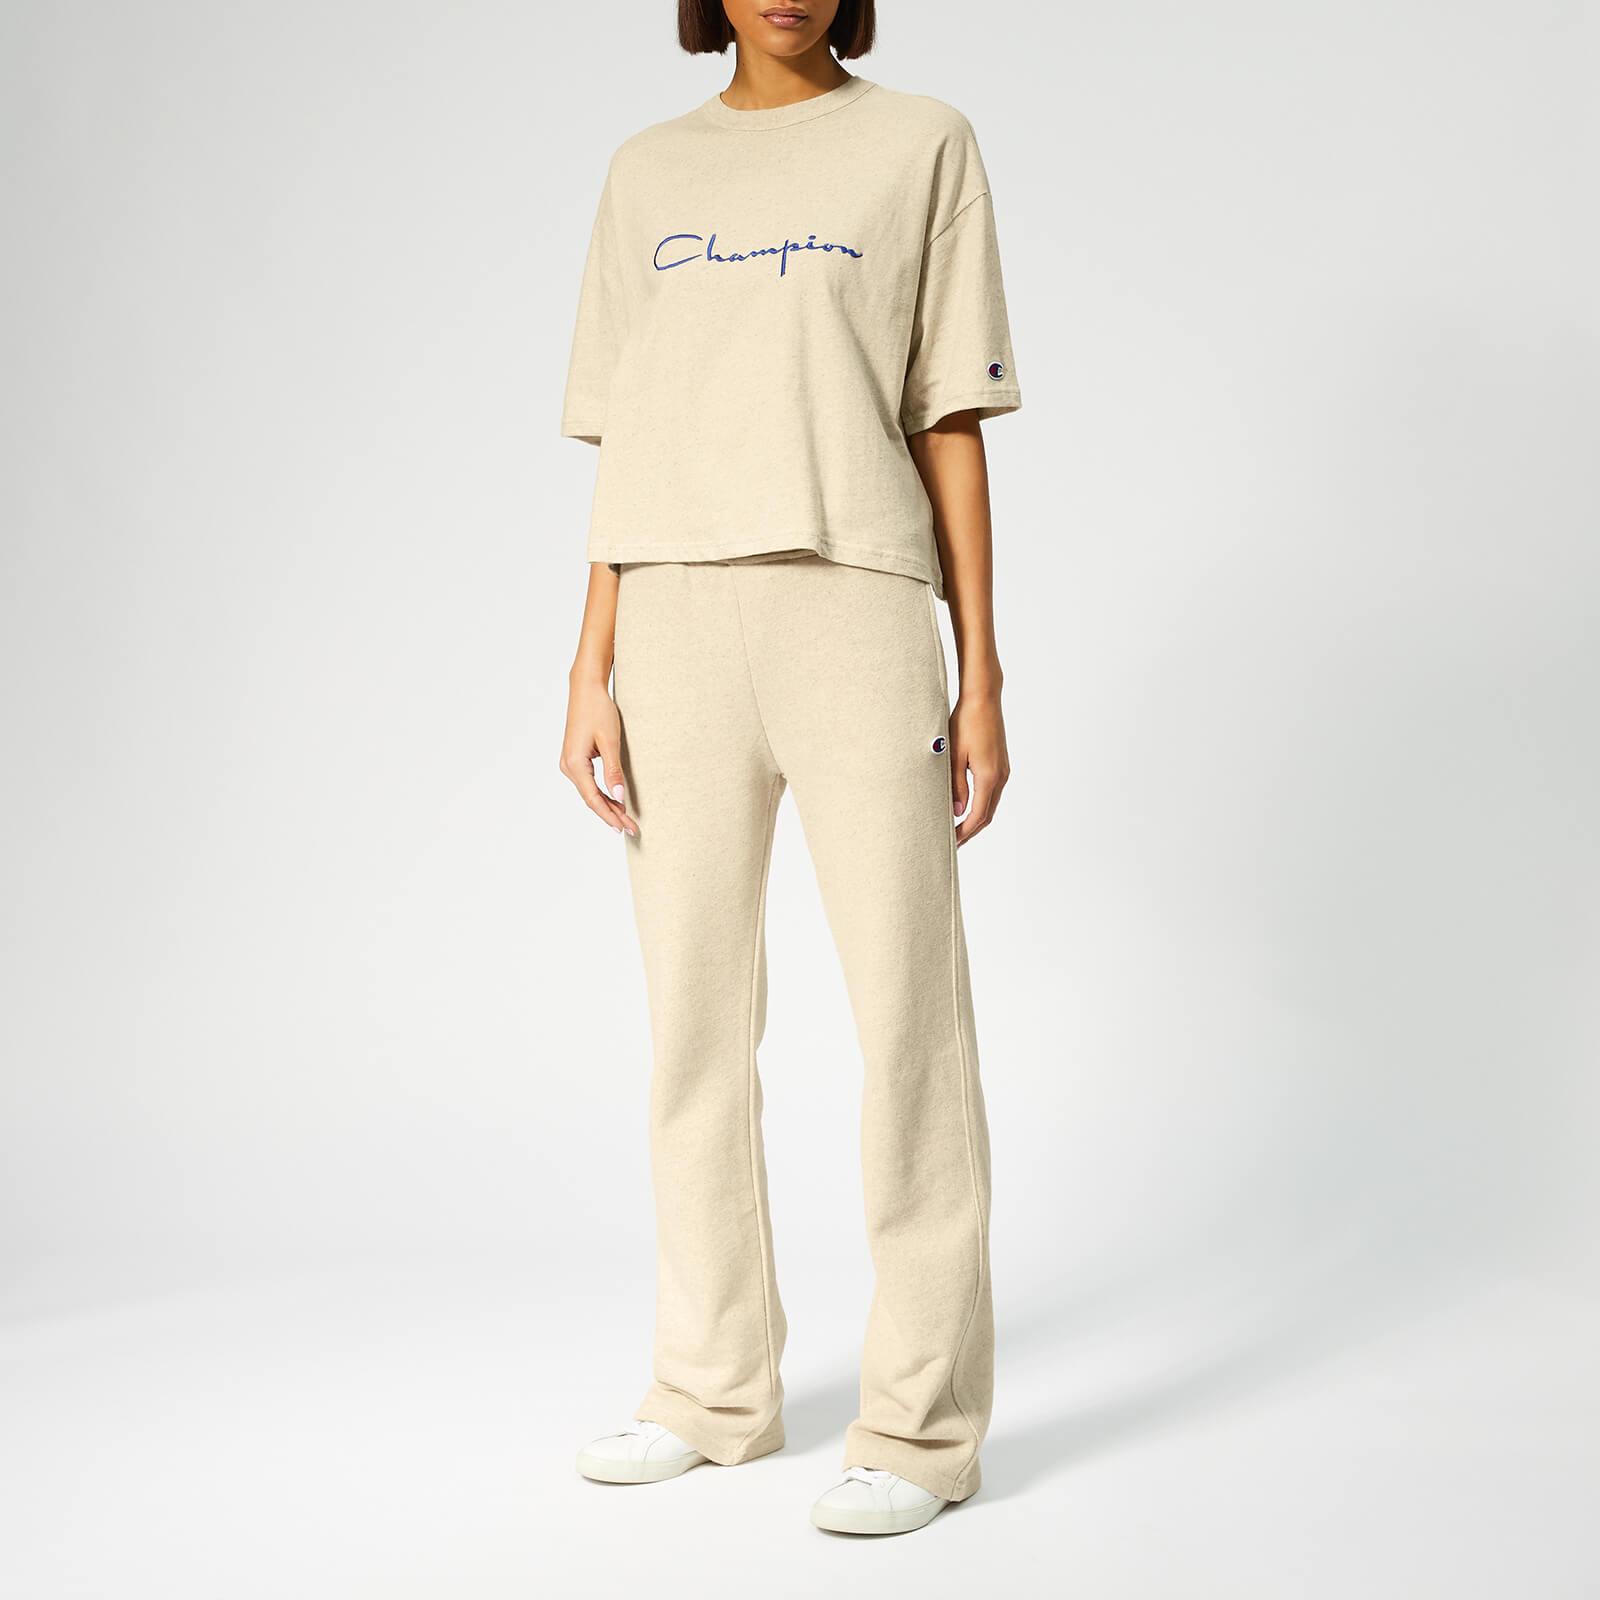 Champion Cotton Bell Bottom Pants in 